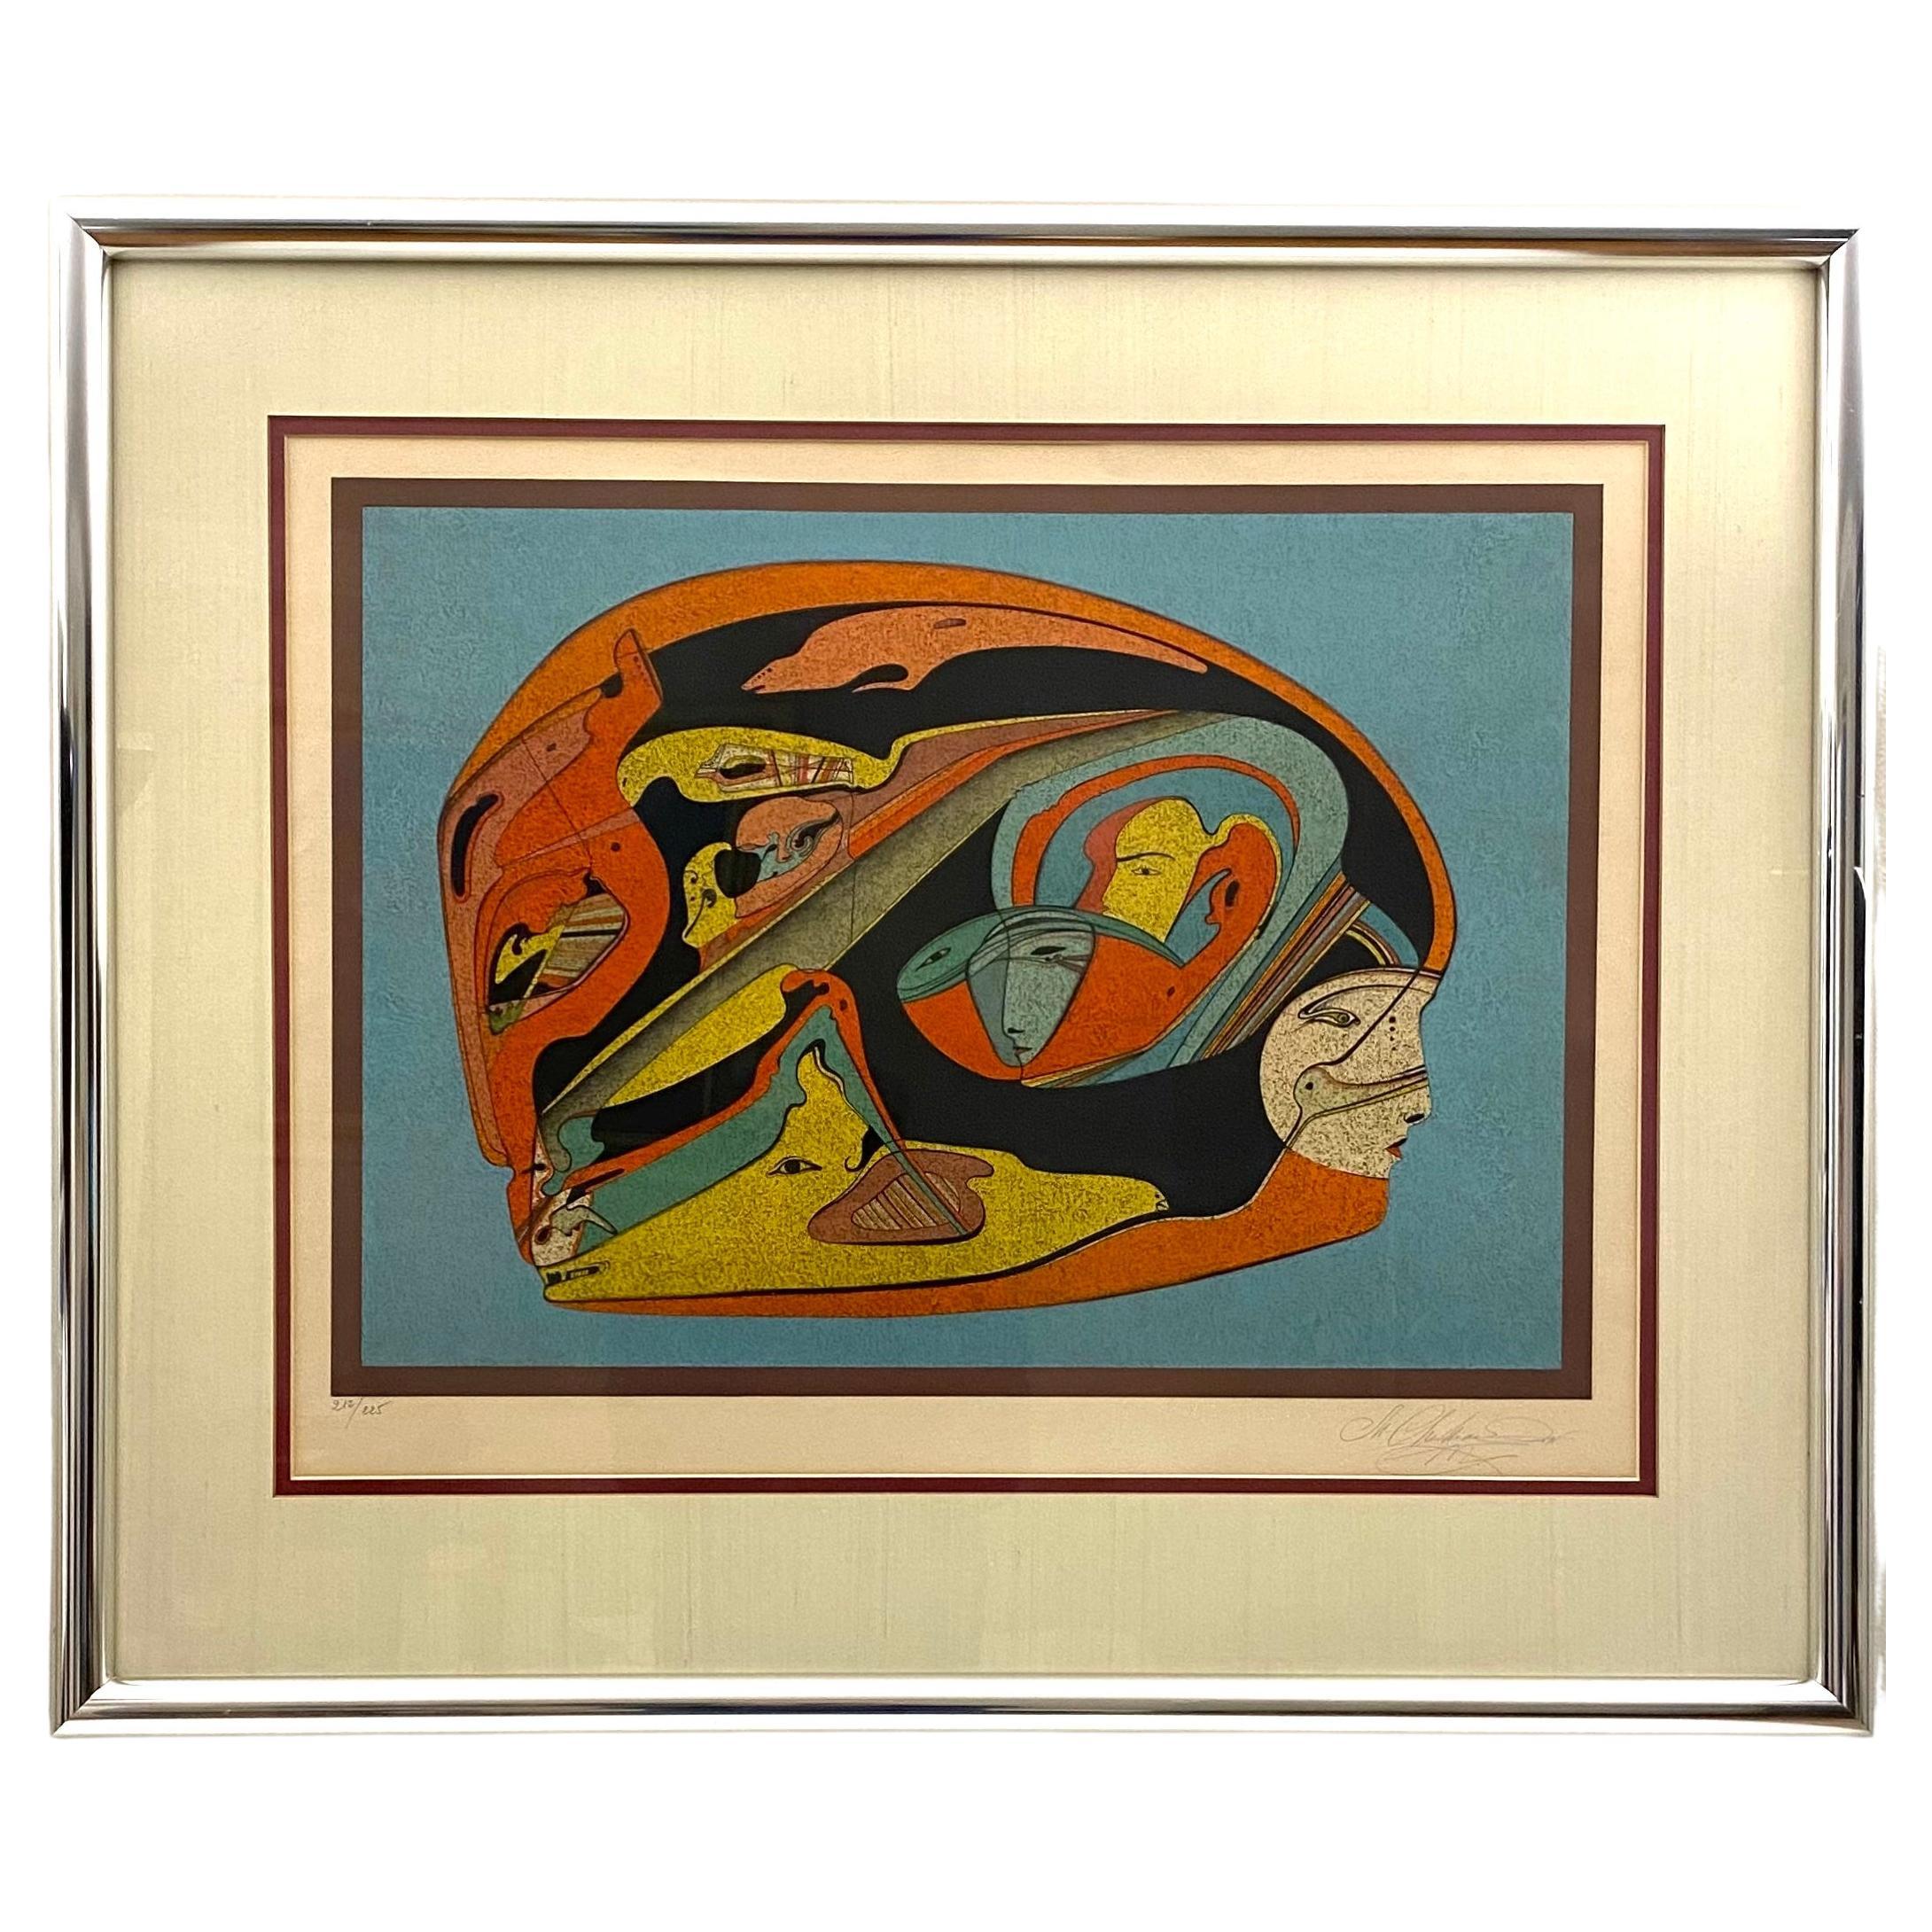 Mihail Chemiakin Color Lithograph Signed